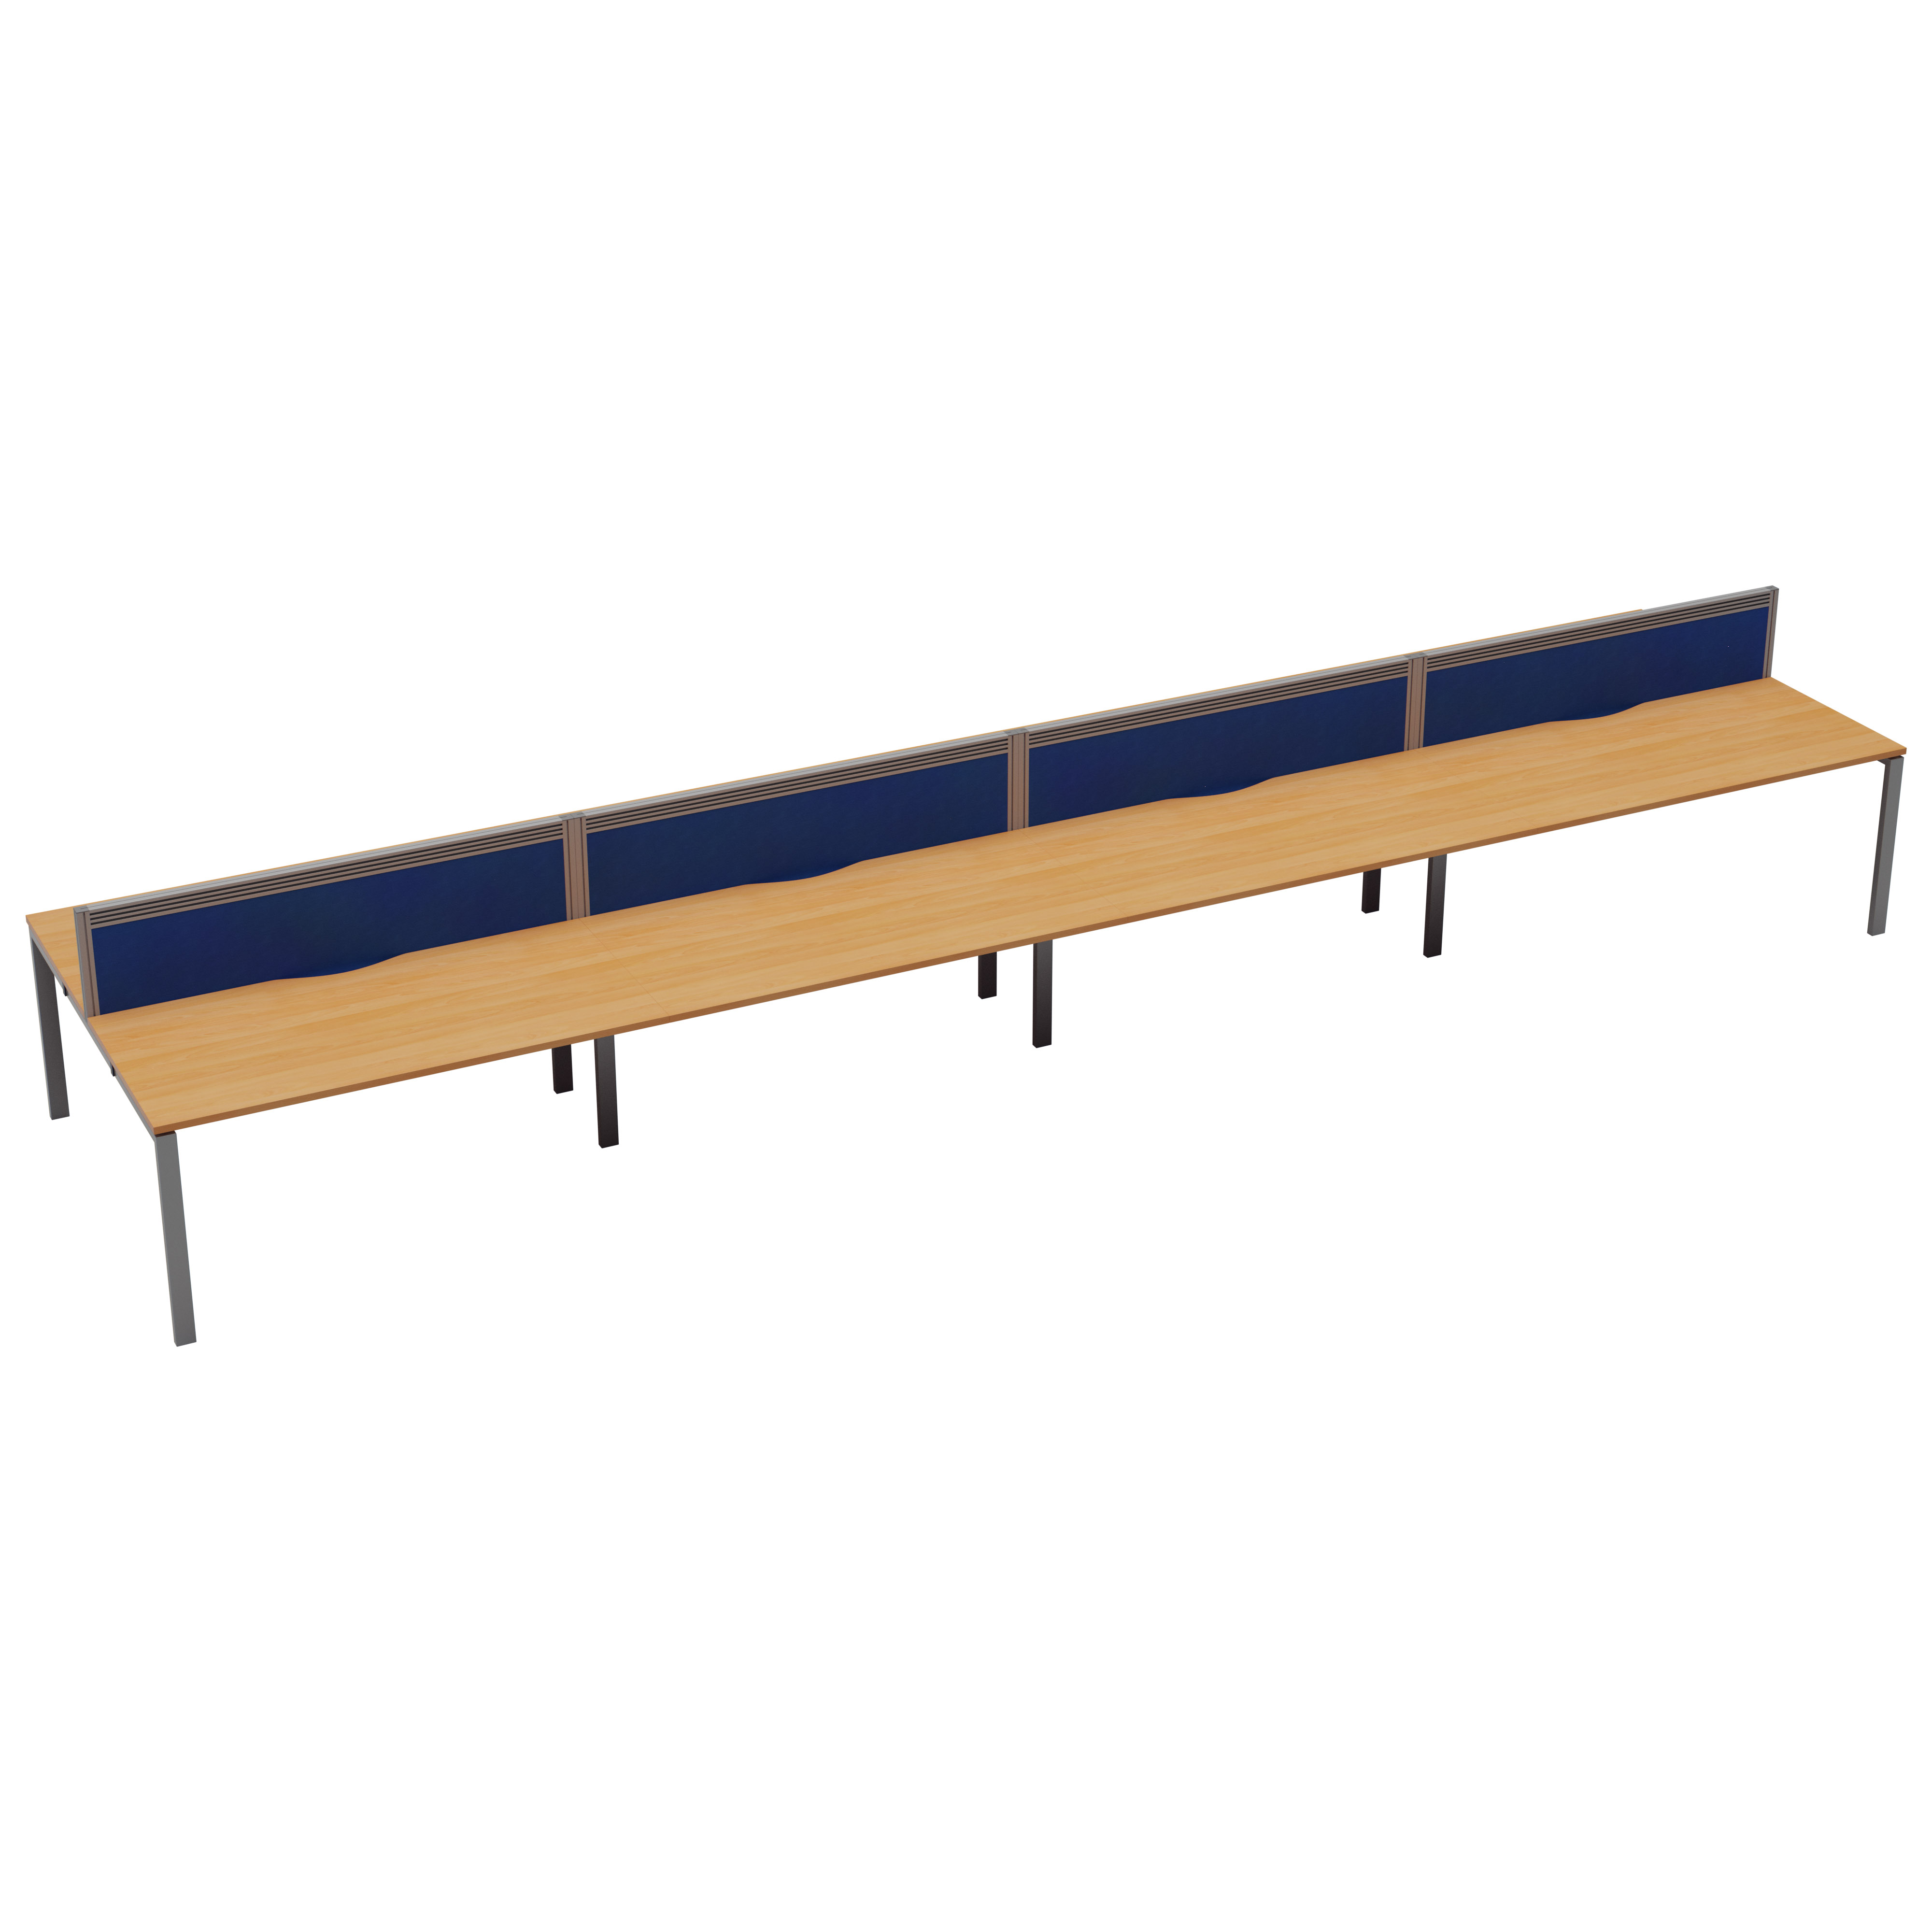 CB 8 Person Bench 1200 x 780 - Beech Top and Silver Legs